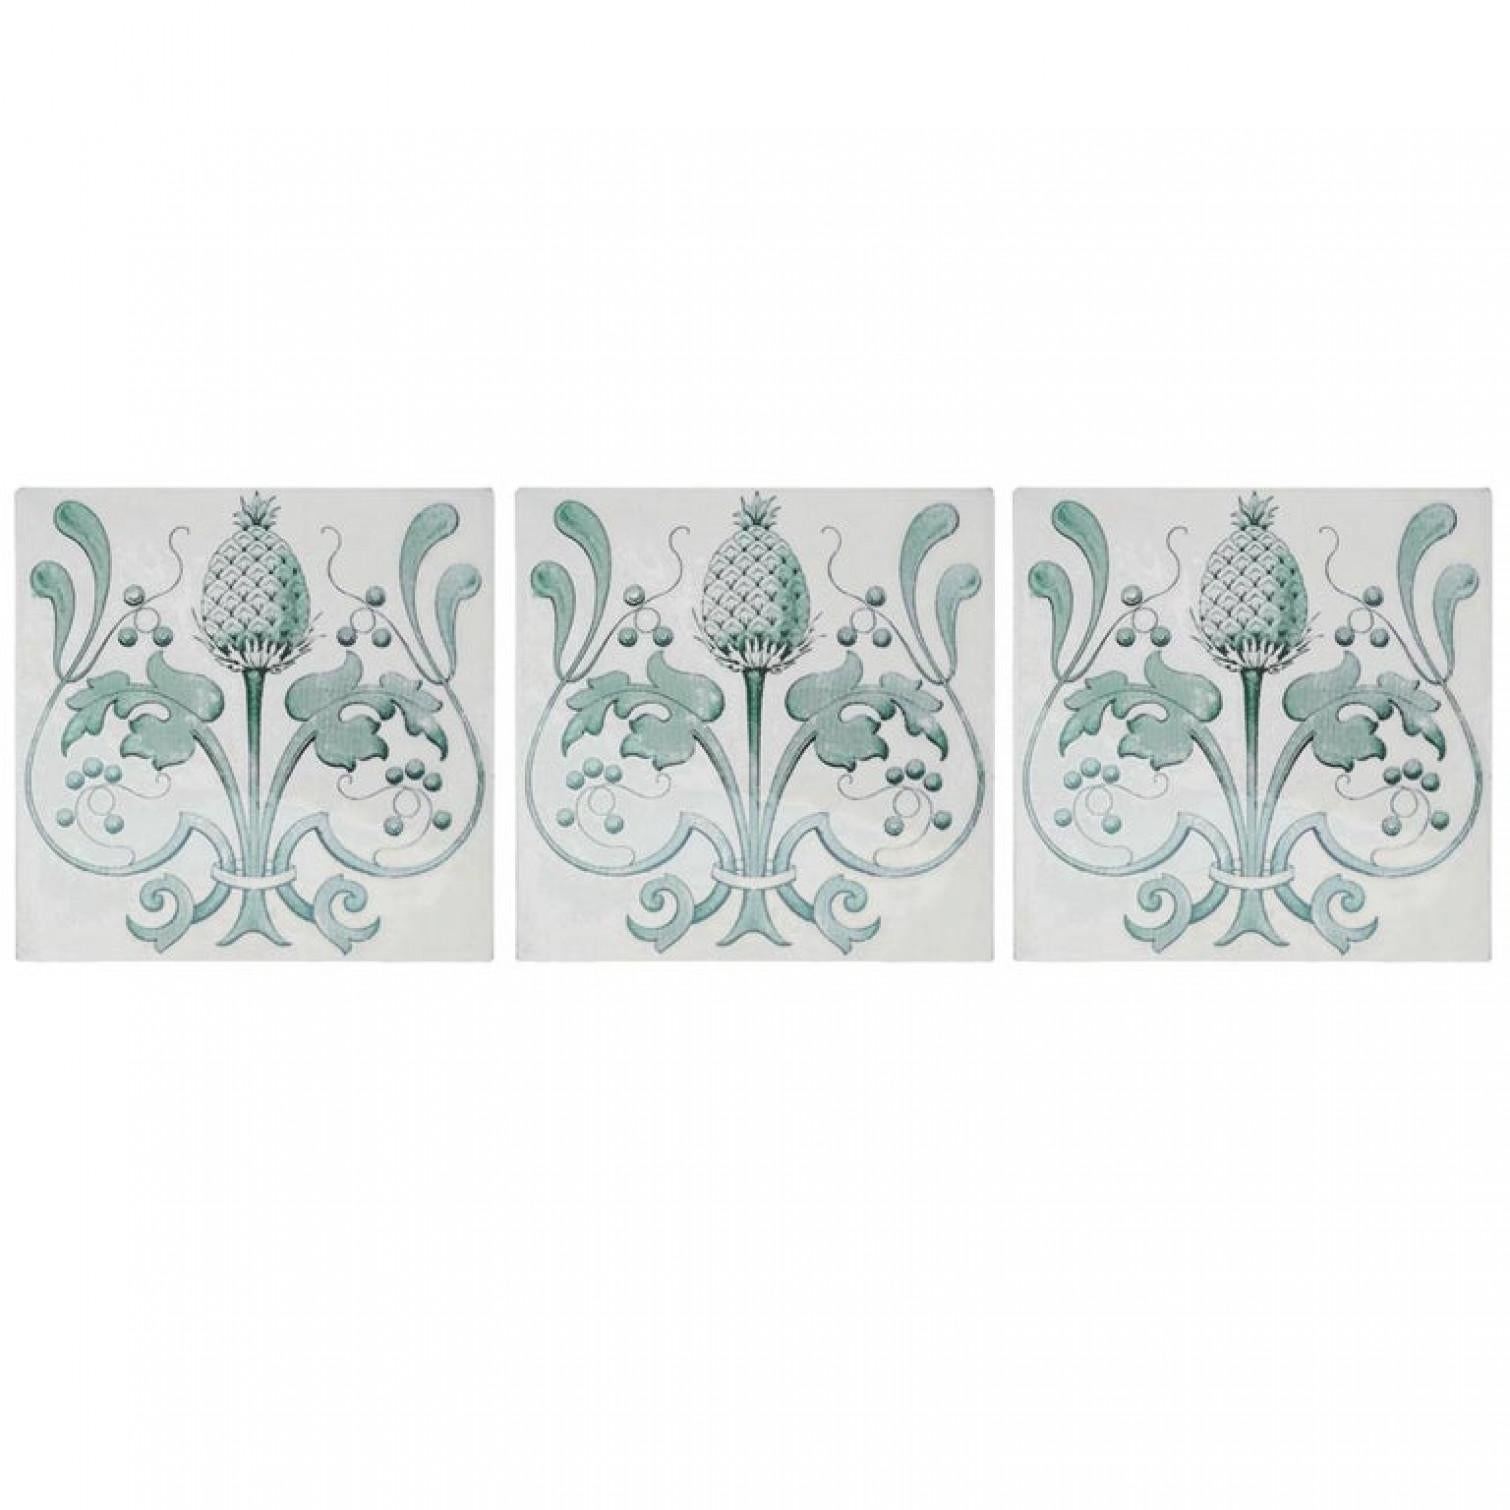 A unique and antique set of 16 Art Nouveau handmade tiles. Manufactured in Belgium, around 1920. A beautiful pattern and color (green). These tiles would be charming displayed on easels, framed or incorporated into a custom tile design.

Size each